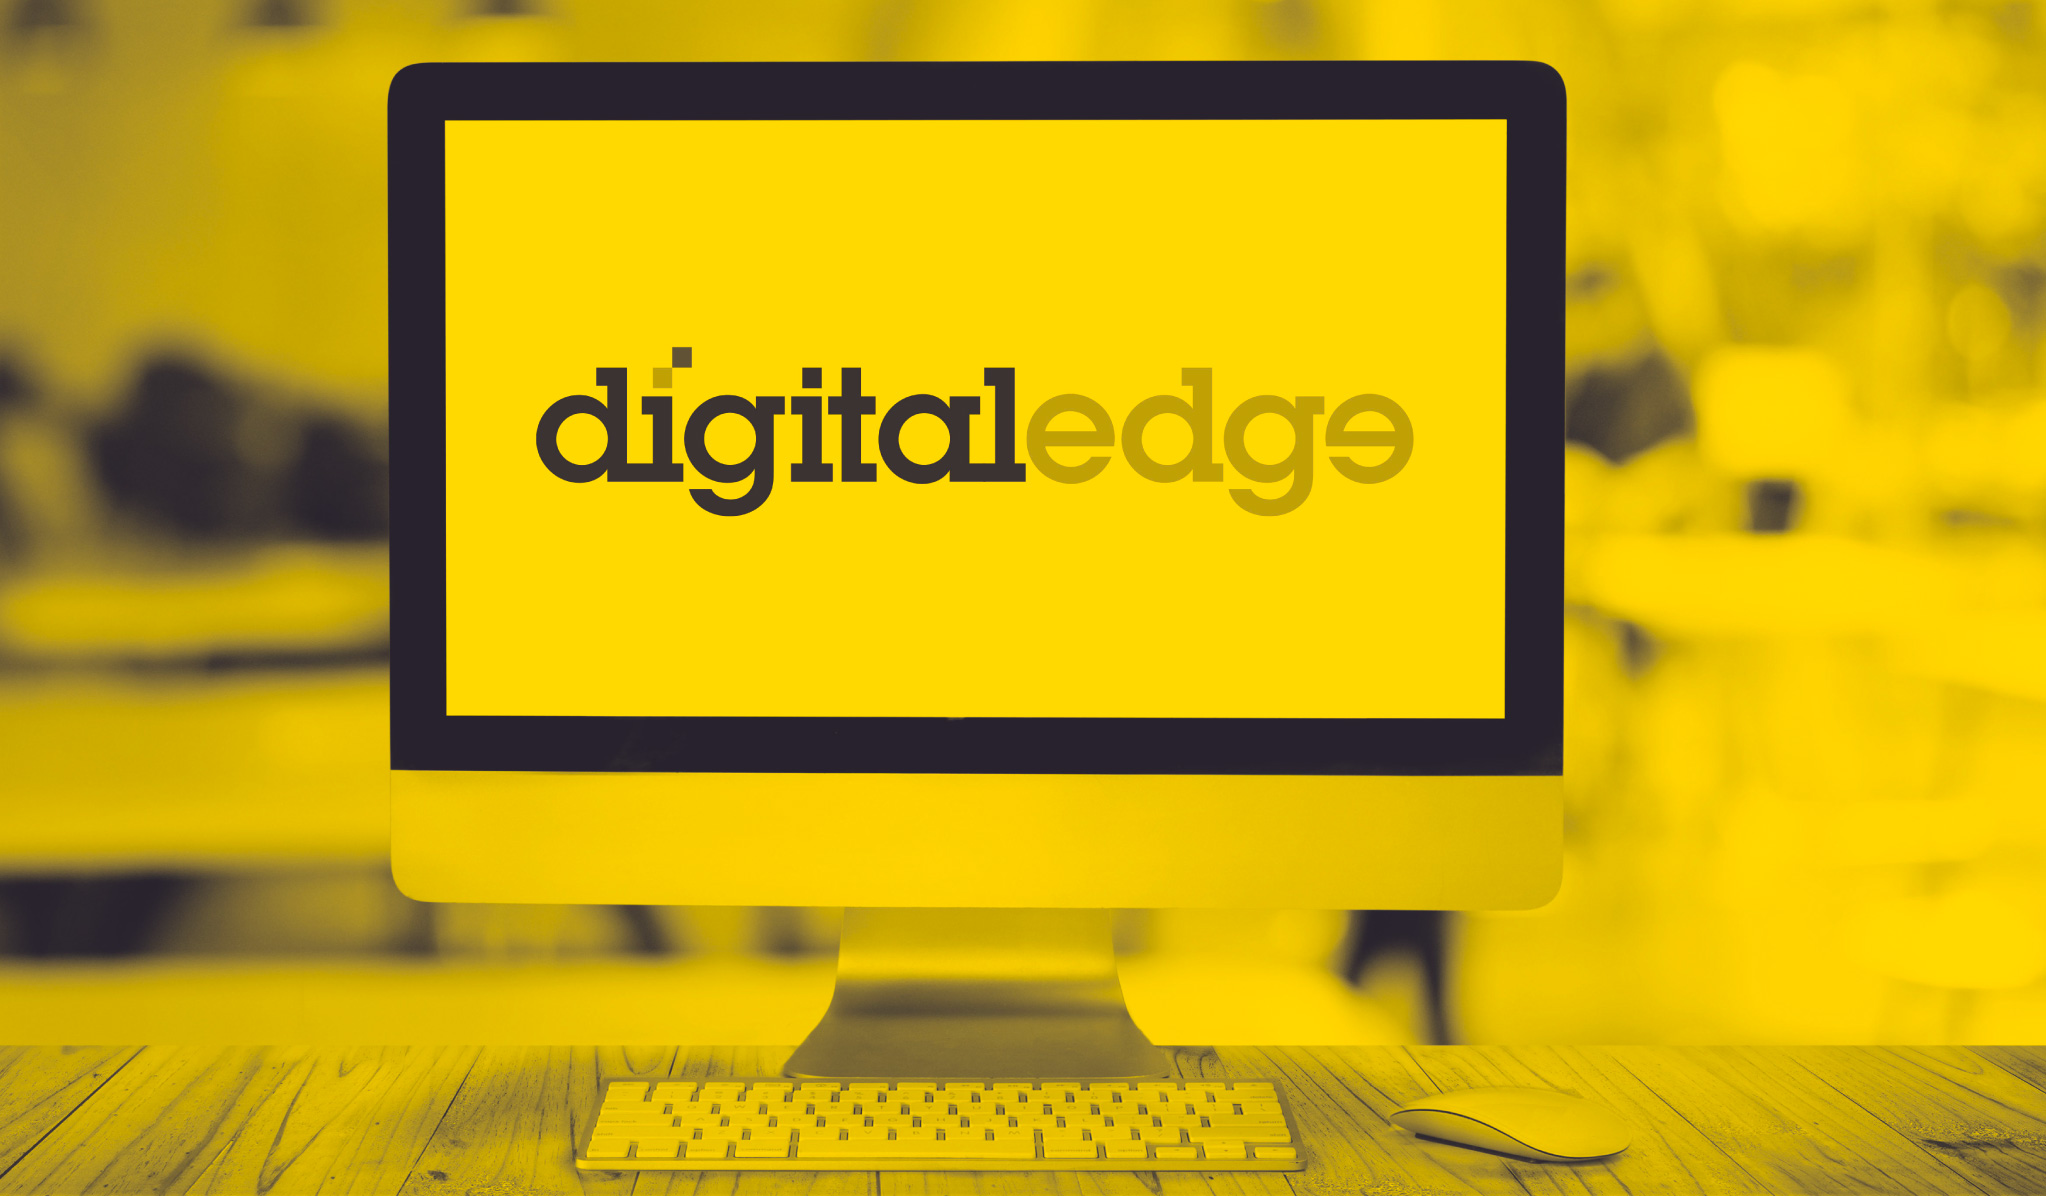 image of a desktop with the digital edge logo